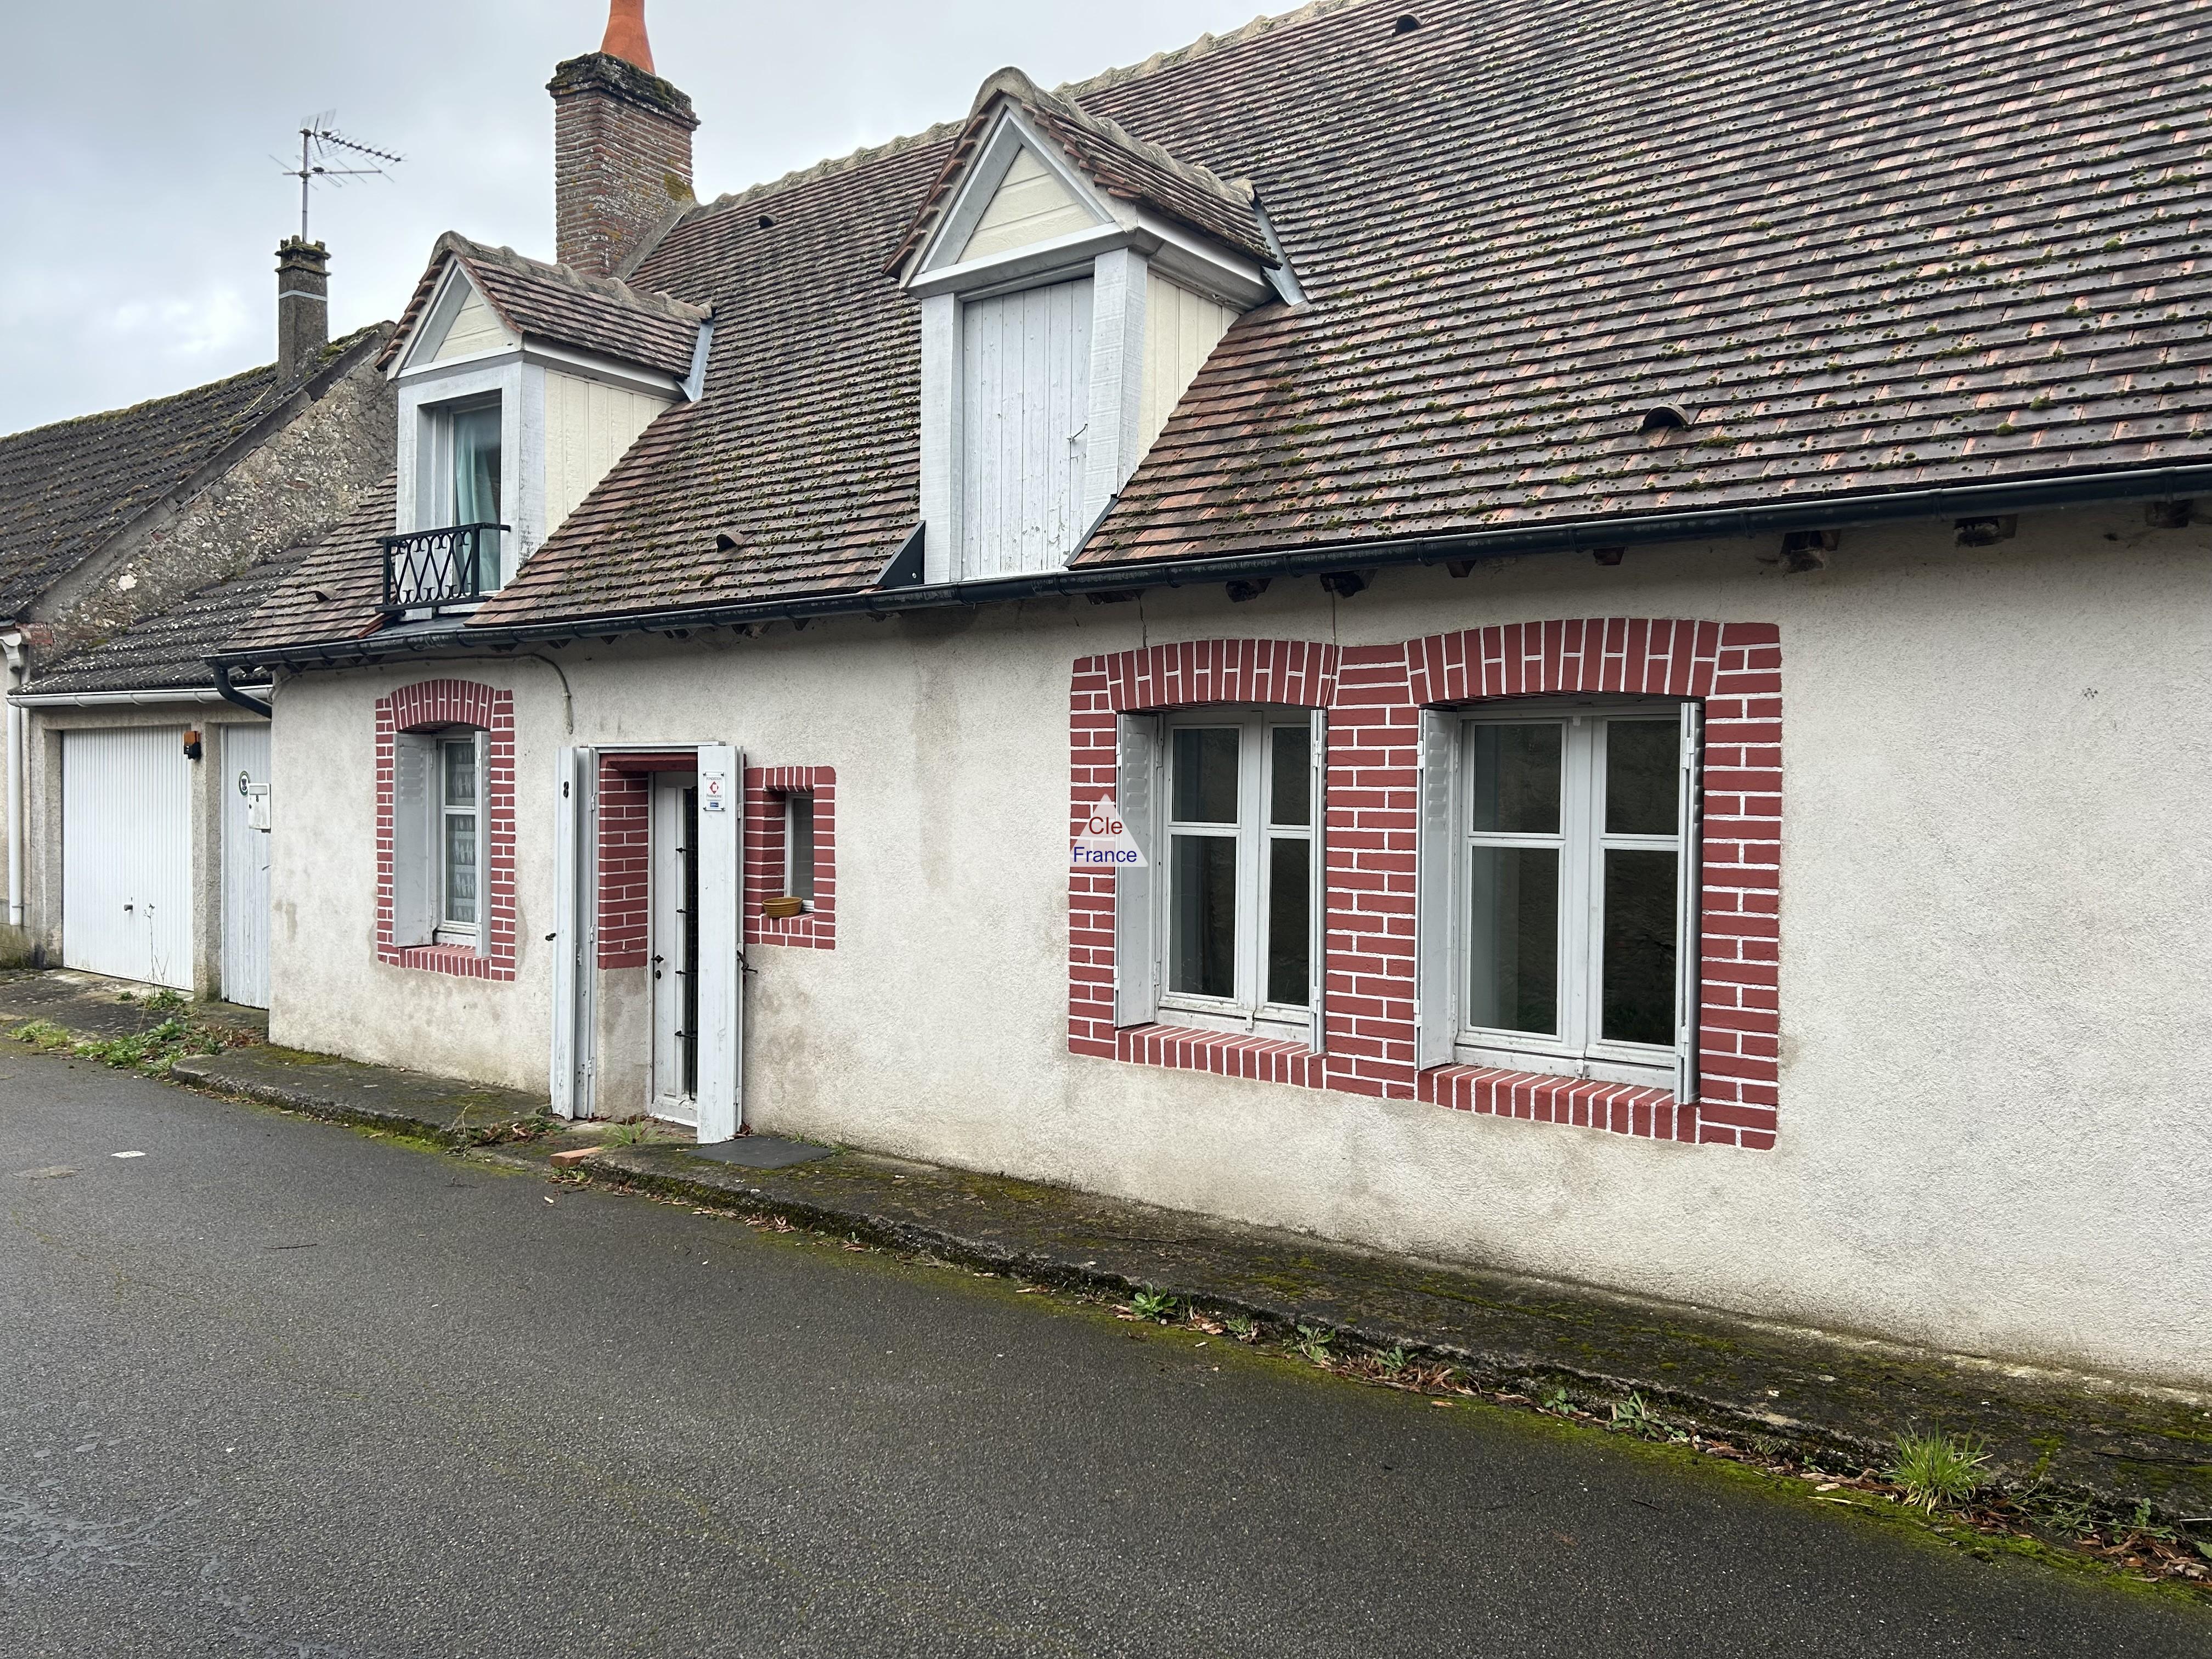 Main Photo of a 2 bedroom  Cottage for sale